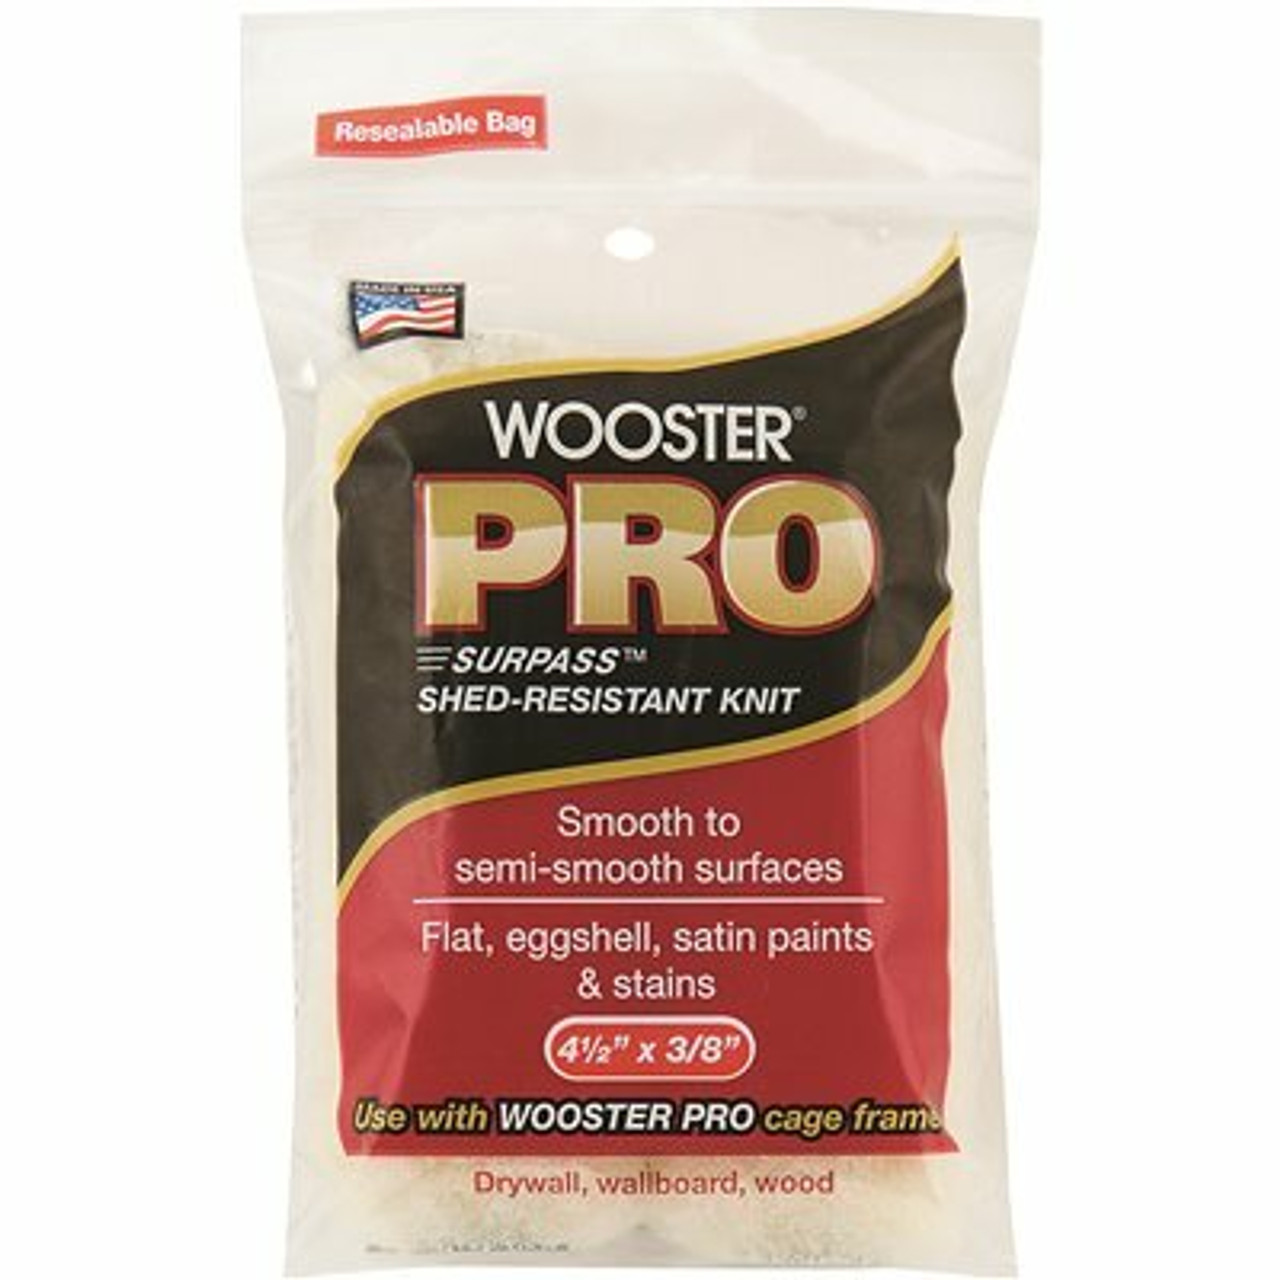 Wooster 4-1/2 In. X 3/8 In. Pro Surpass Shed-Resistant Knit High-Density Fabric Cage Frame Mini Roller (2-Pack)